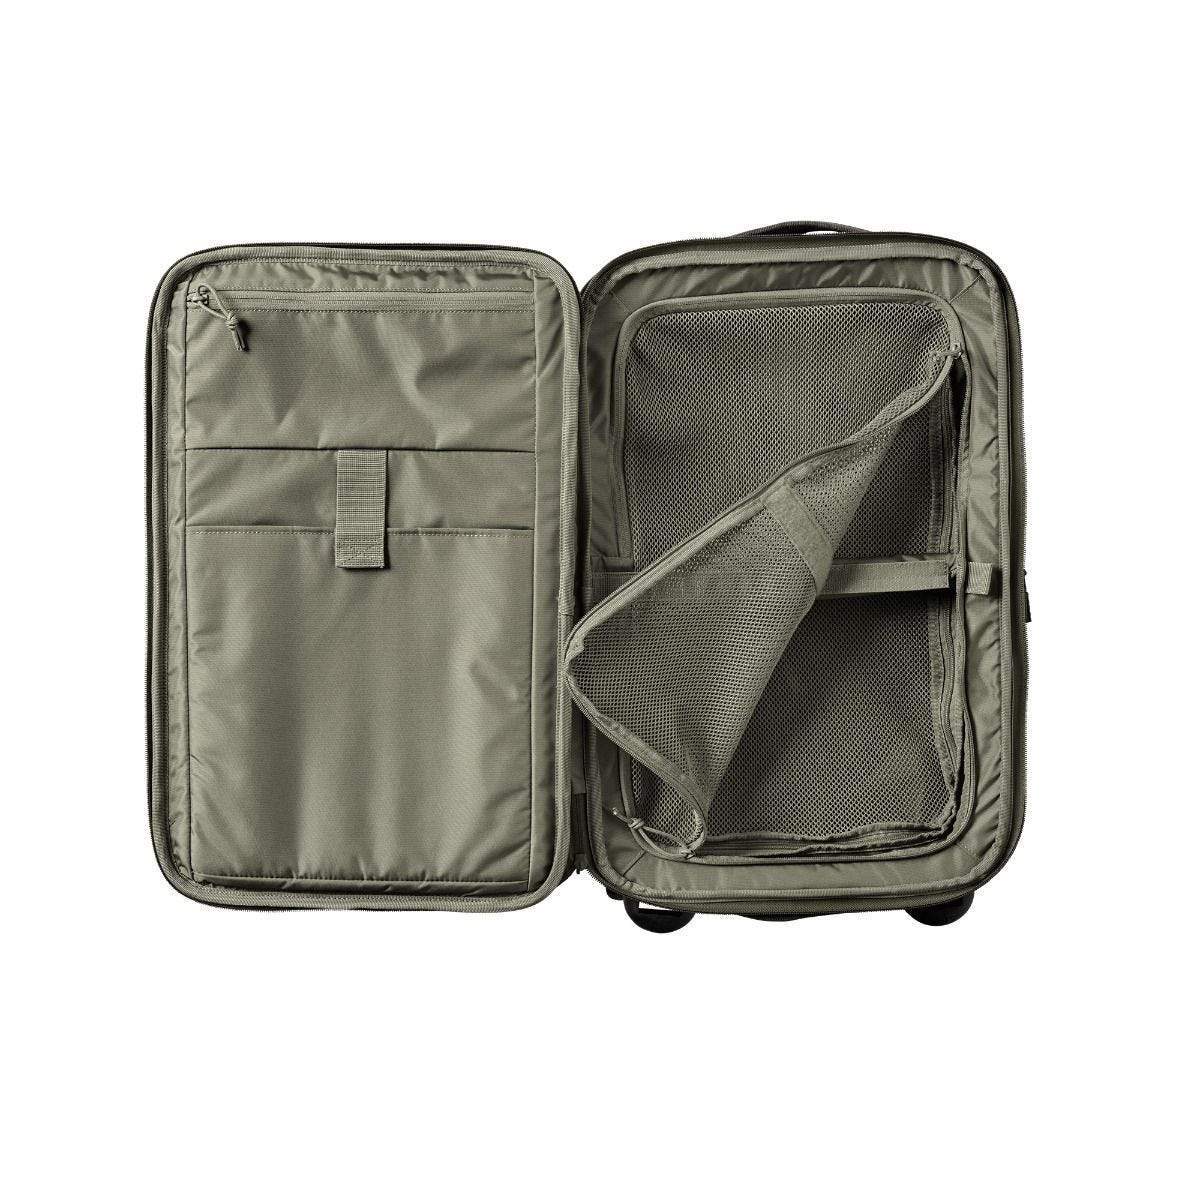 5.11 Tactical Load Up 22-inch 46L Carry On Bag Volcanic Bags, Packs and Cases 5.11 Tactical Tactical Gear Supplier Tactical Distributors Australia